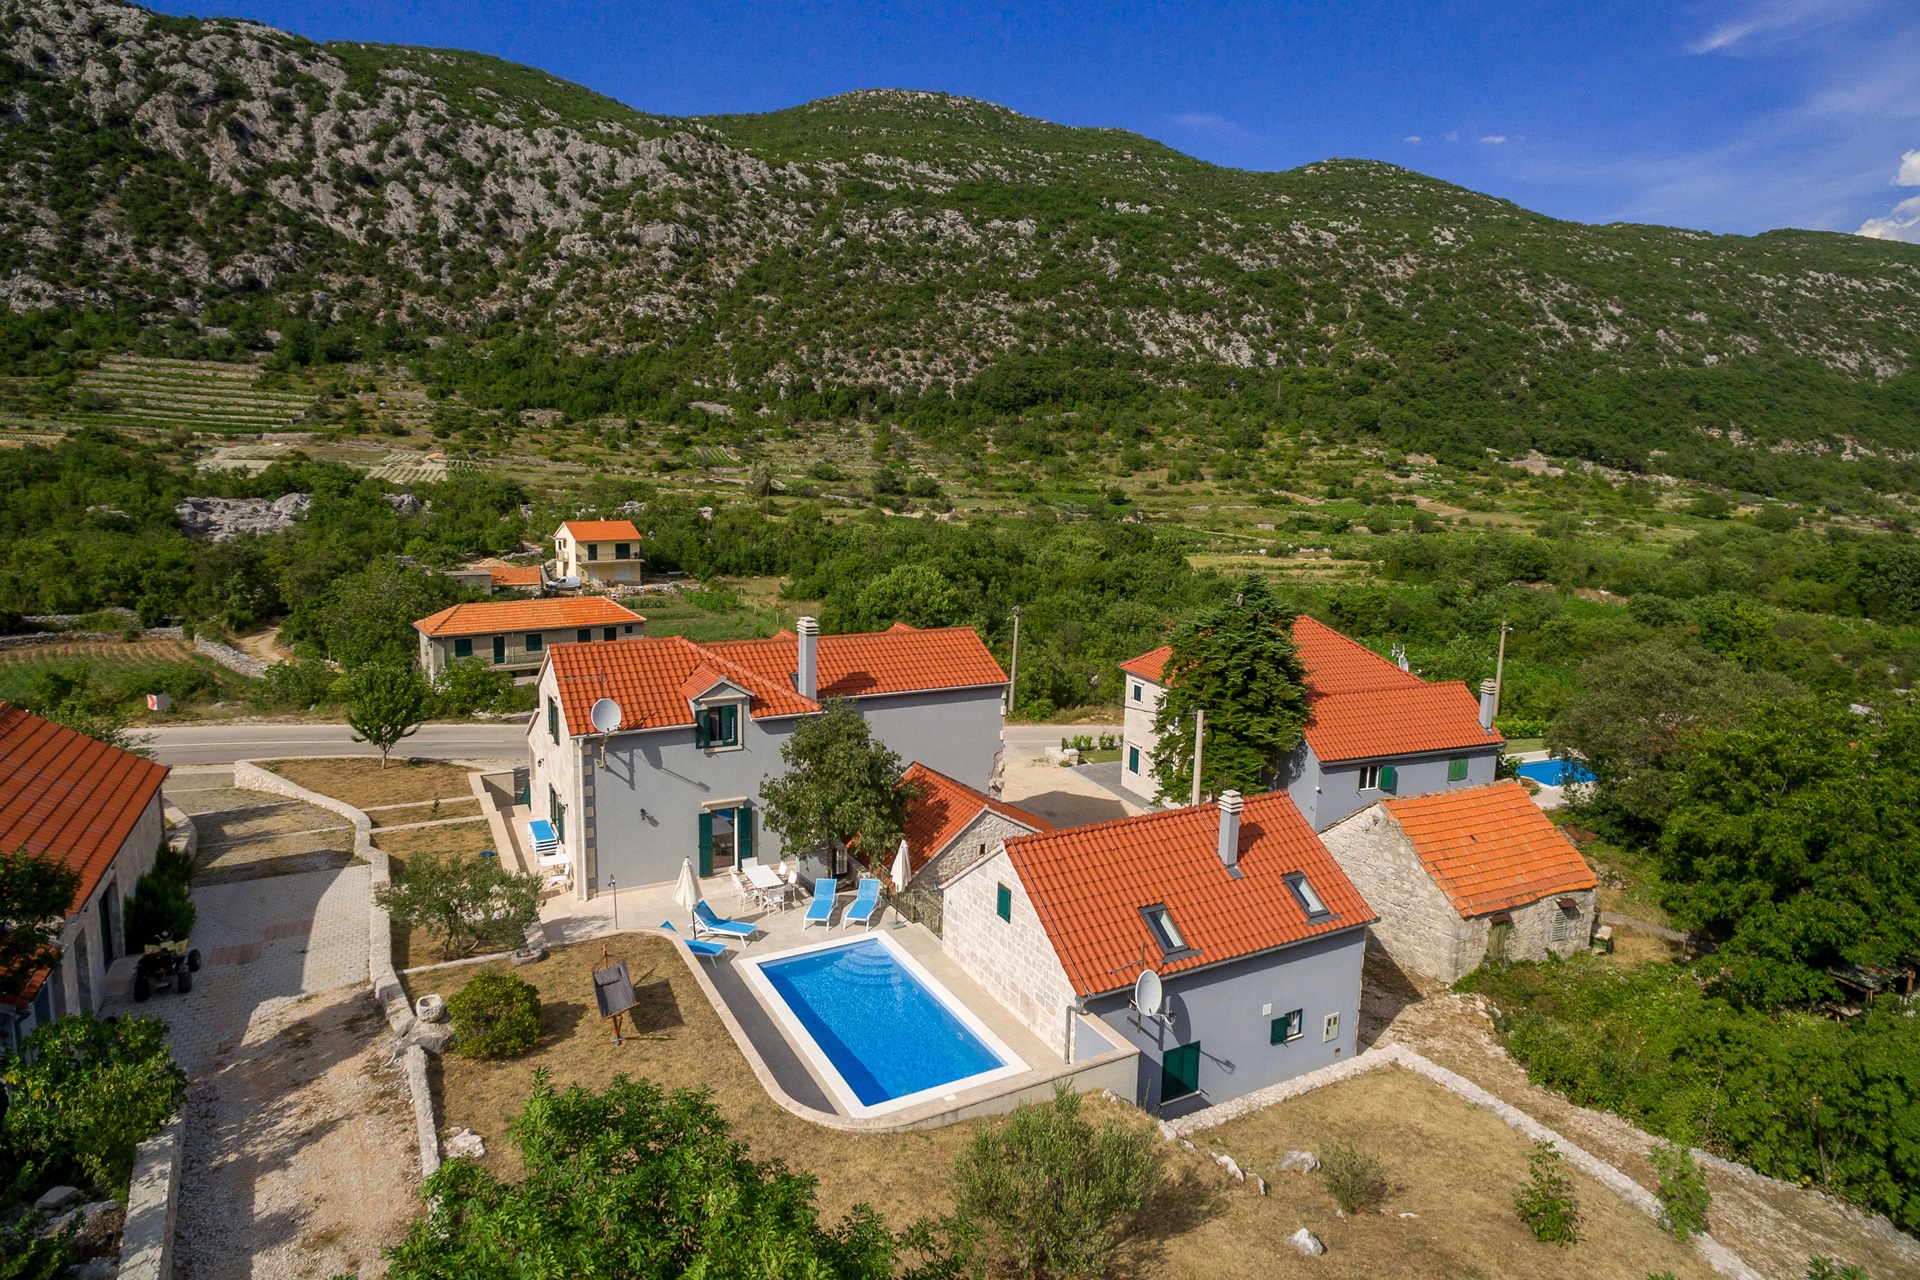 Drone view on the Villa Roglic and its property